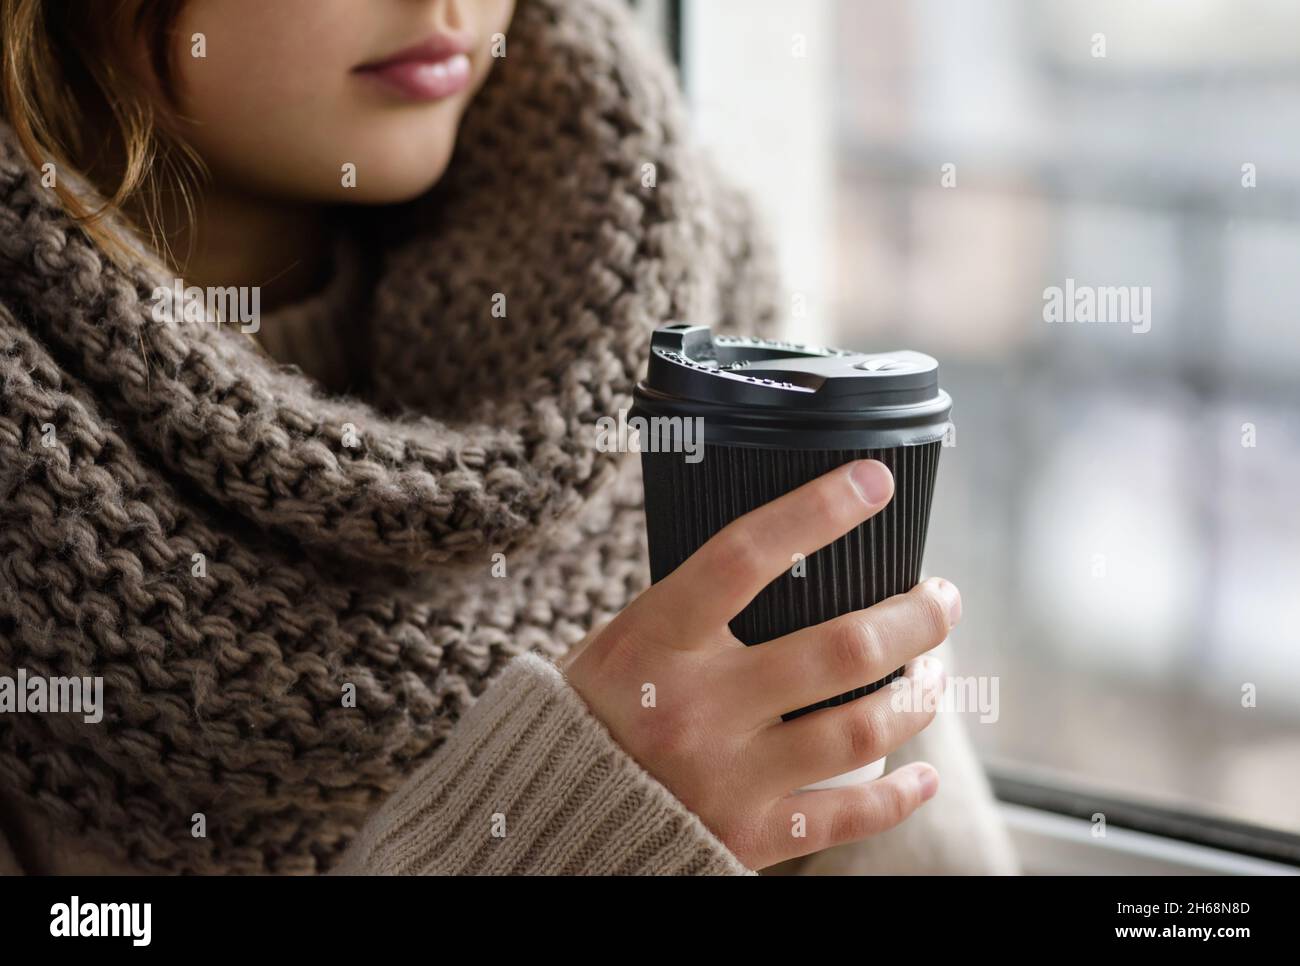 Girl is holding a paper cup with coffee. Stock Photo